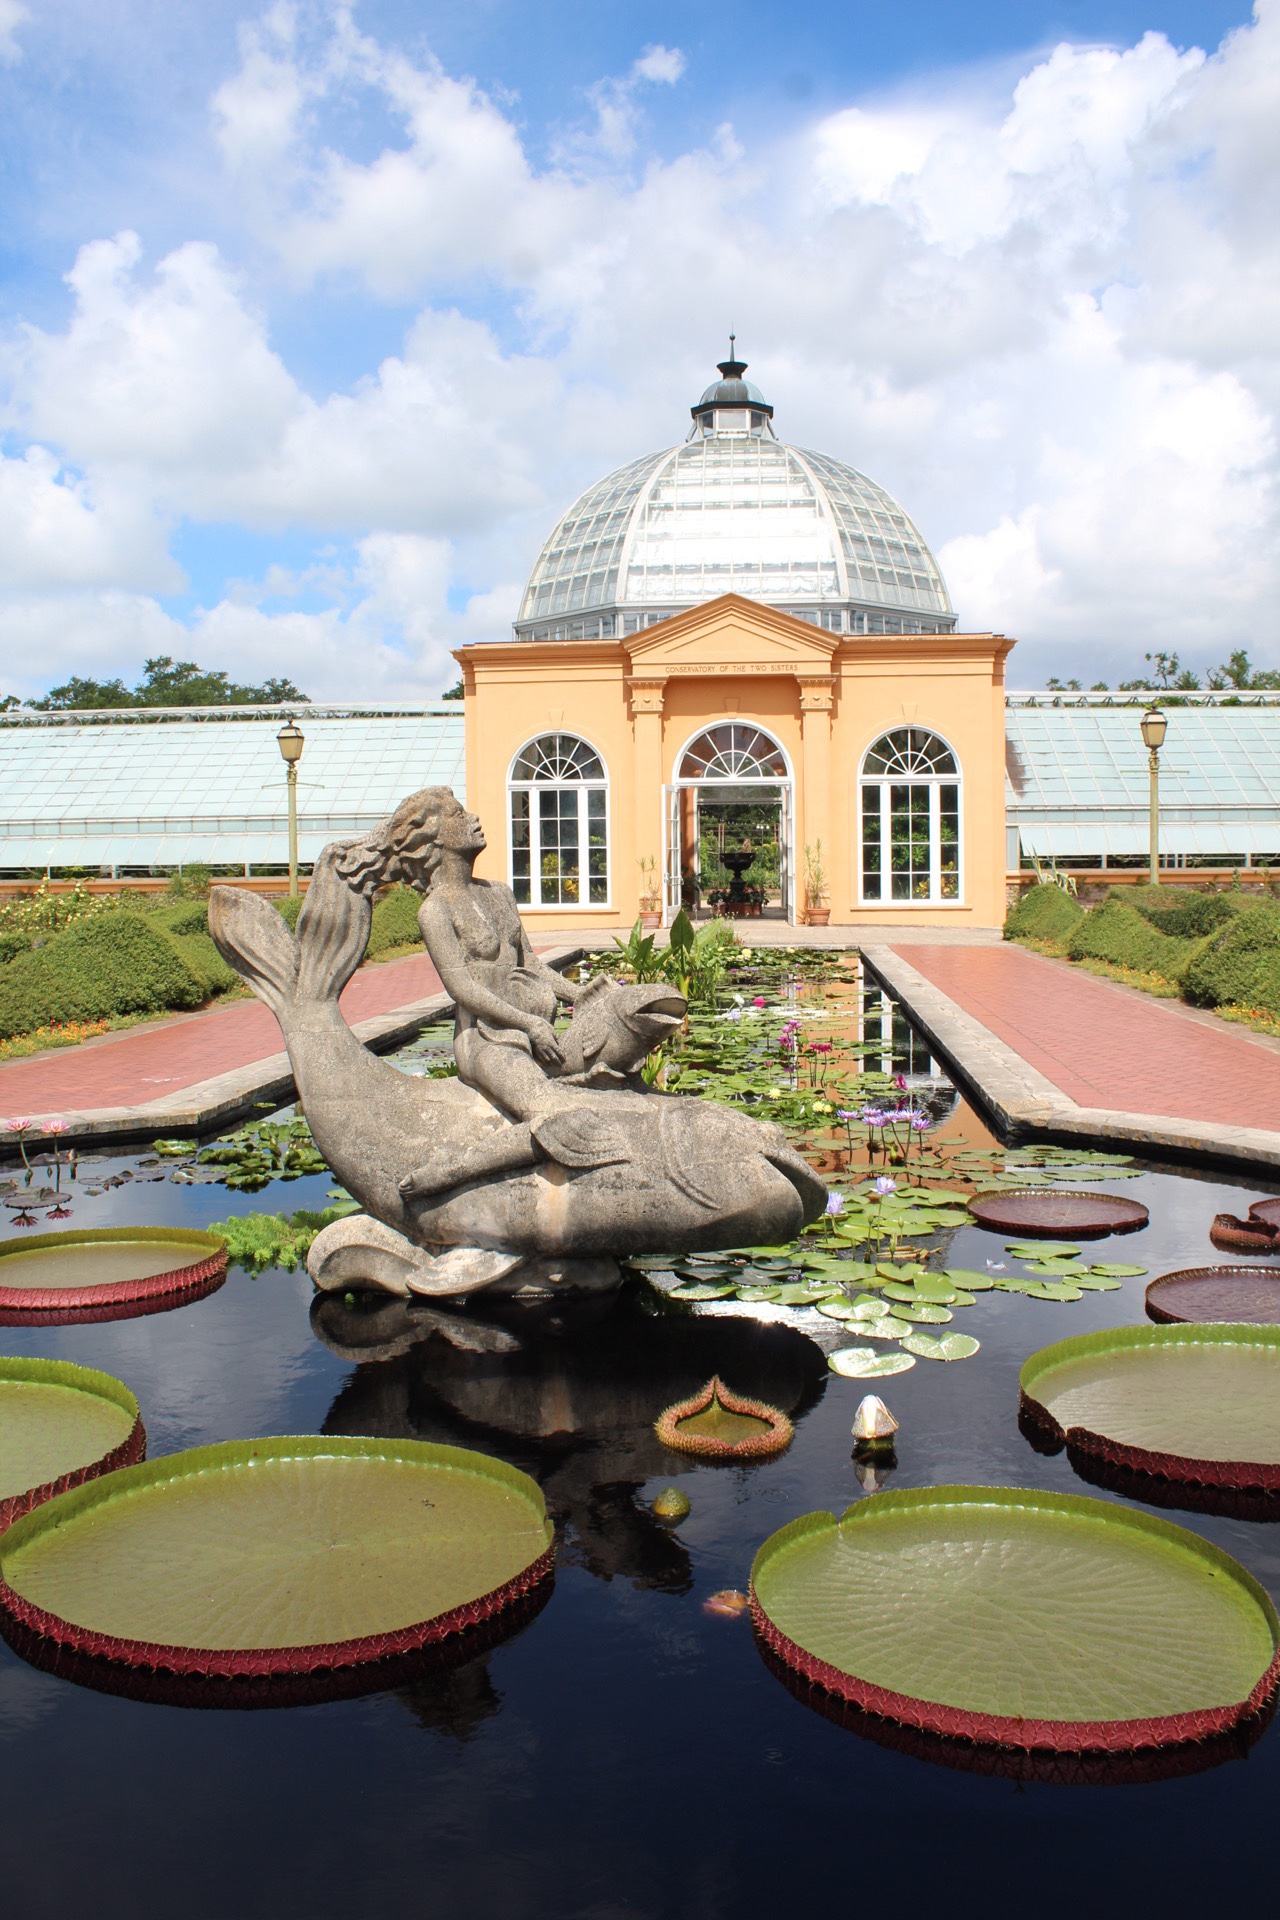 10 Reasons to visit the New Orleans City Park Botanical Garden